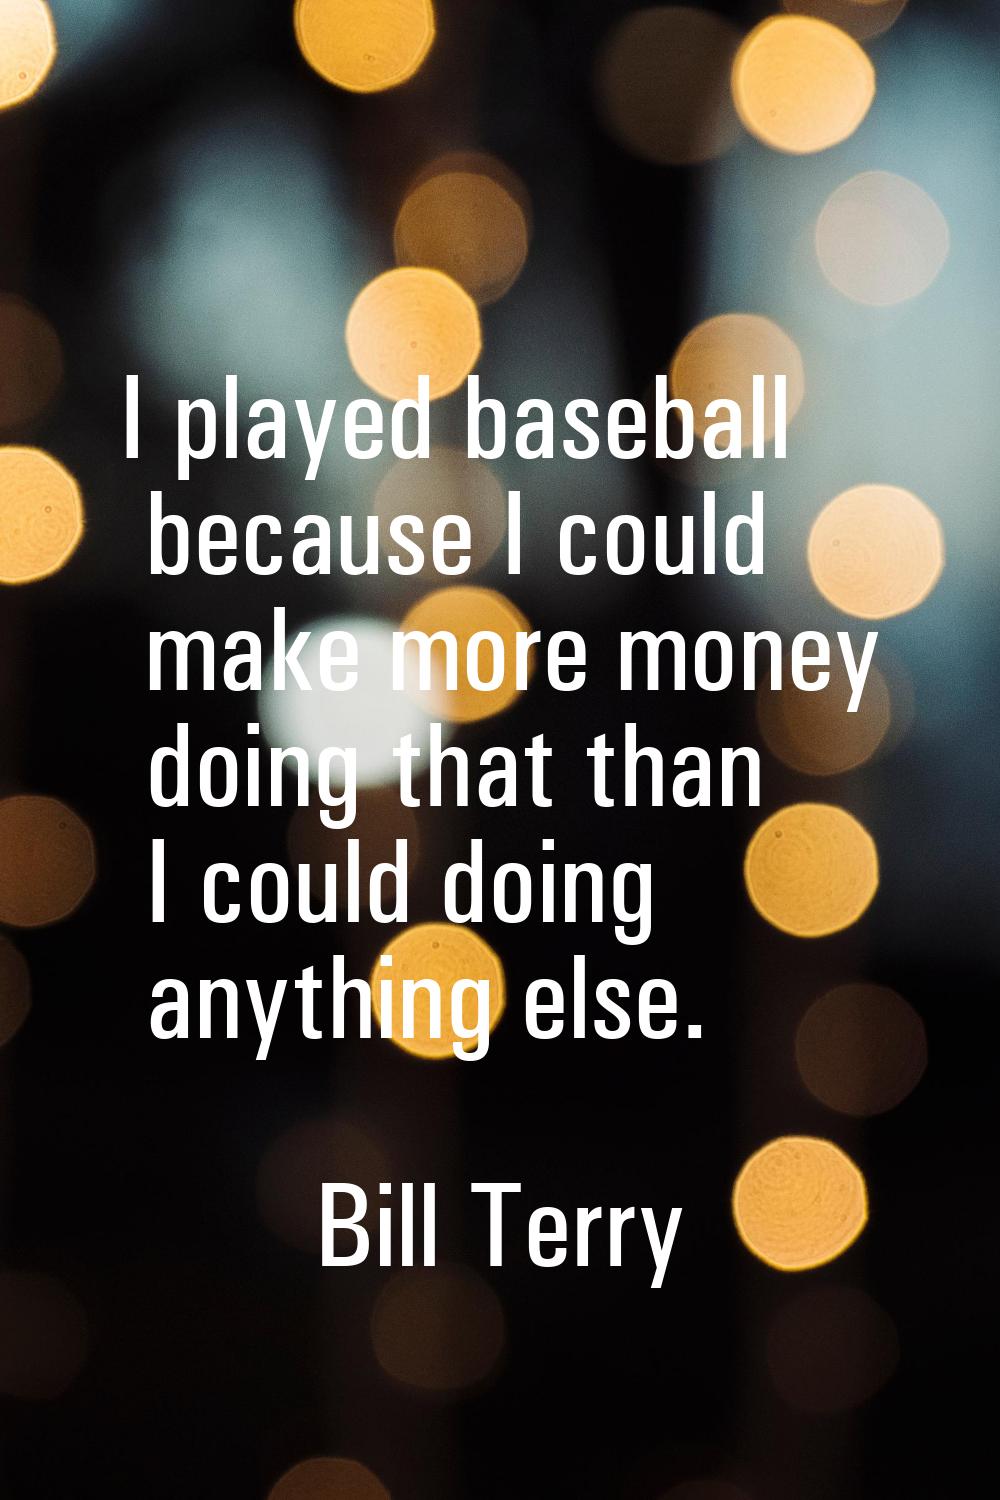 I played baseball because I could make more money doing that than I could doing anything else.